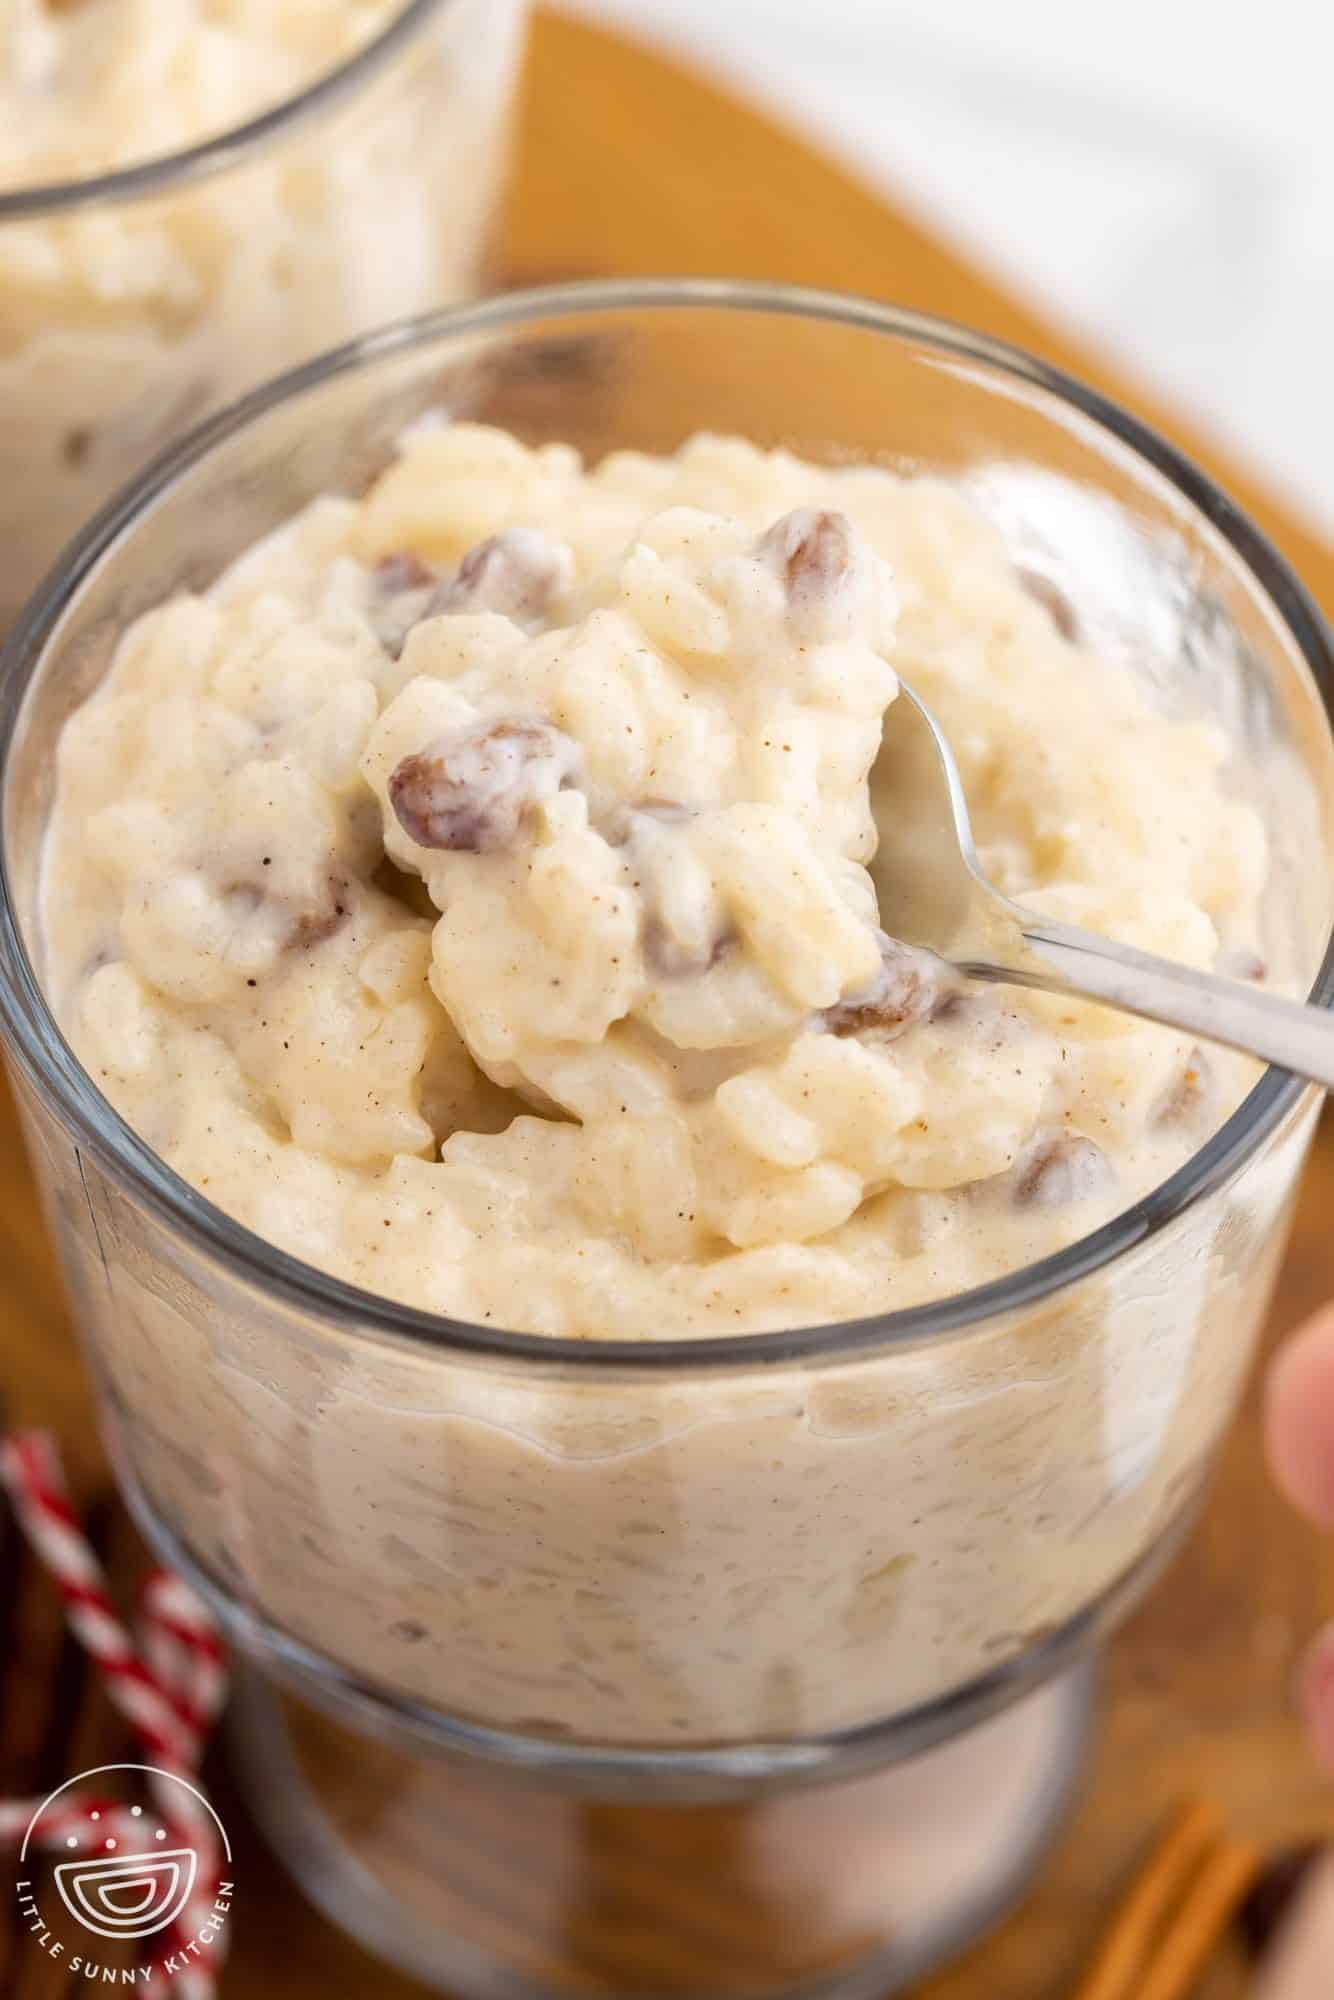 a bowl of homemade rice pudding with raisins. A spoon is lifting up a bite.